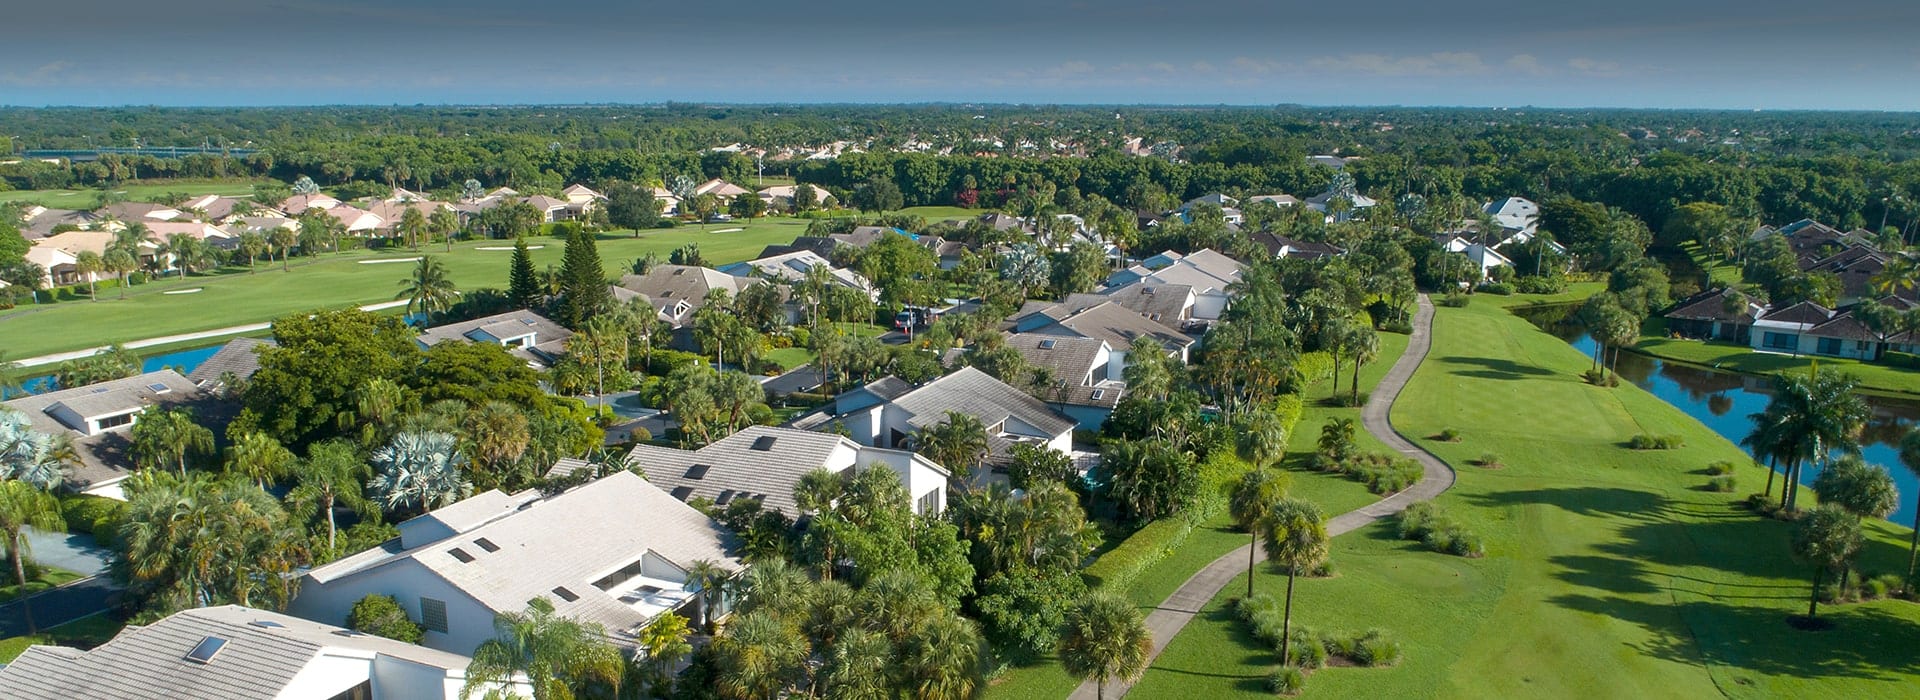 Chapel Creek patio homes with views of Boca West golf courses